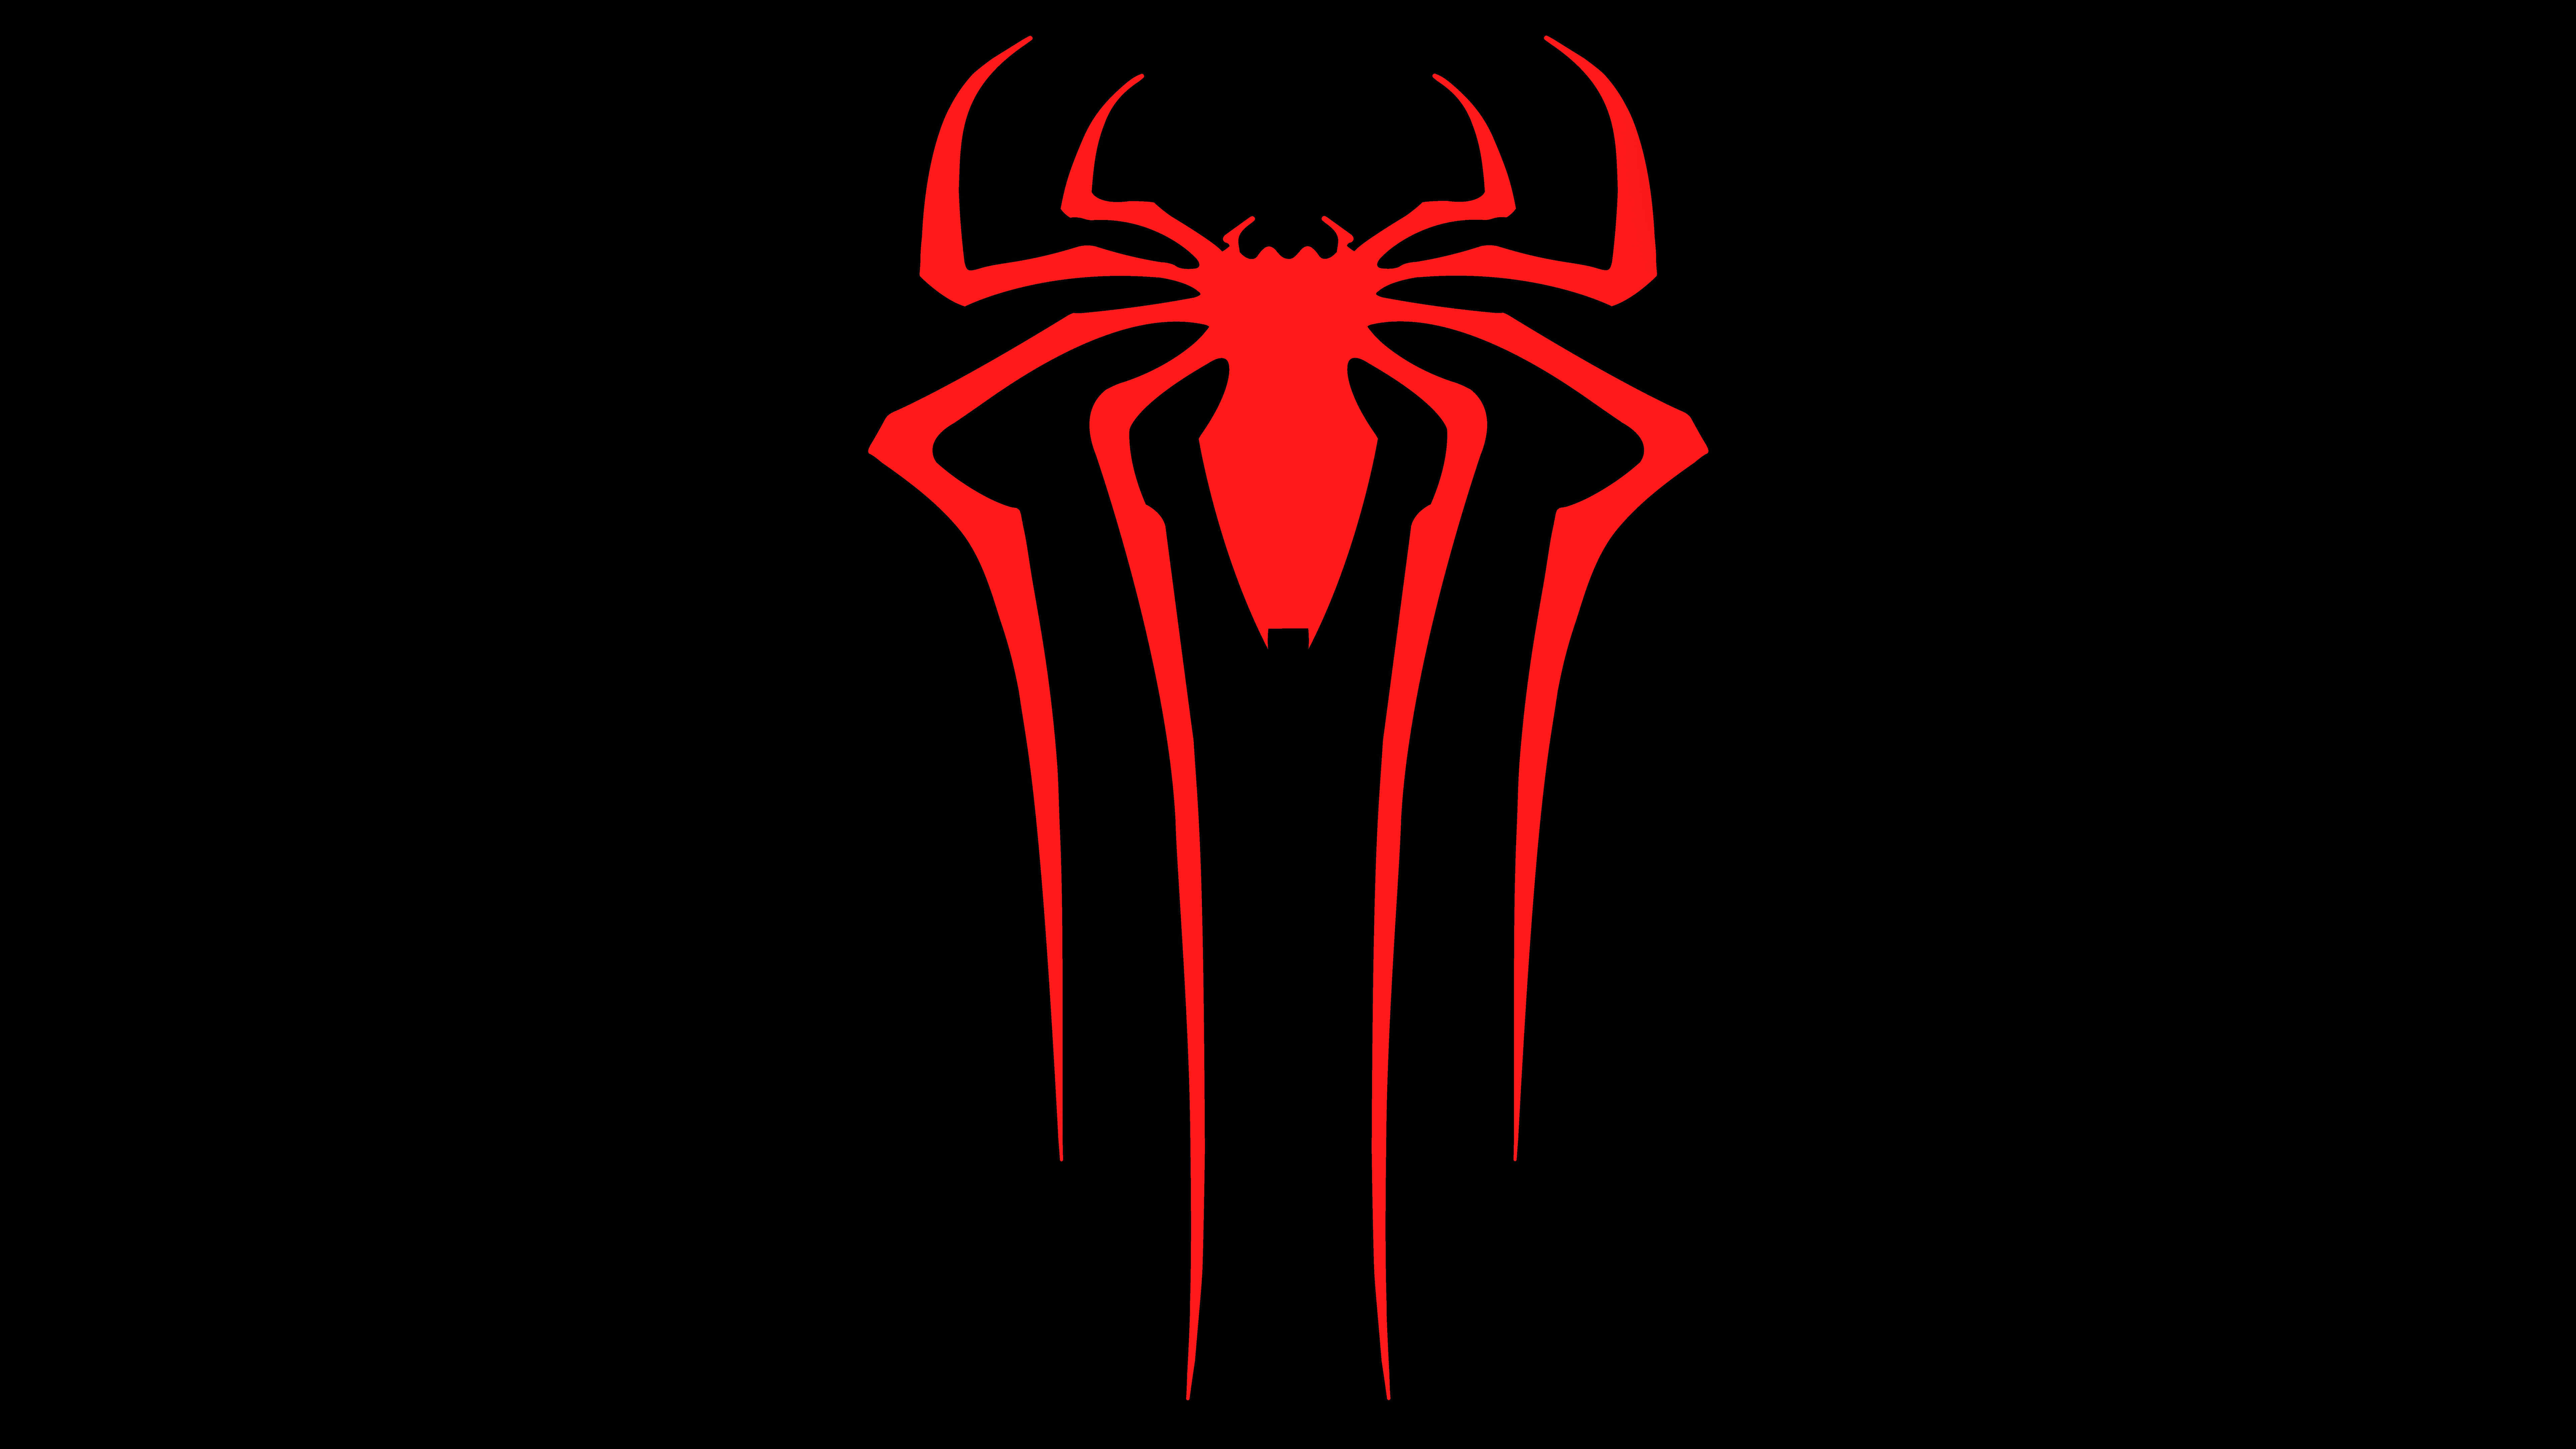 Related Images - Spiderman Logo Wallpaper 1080p , HD Wallpaper & Backgrounds